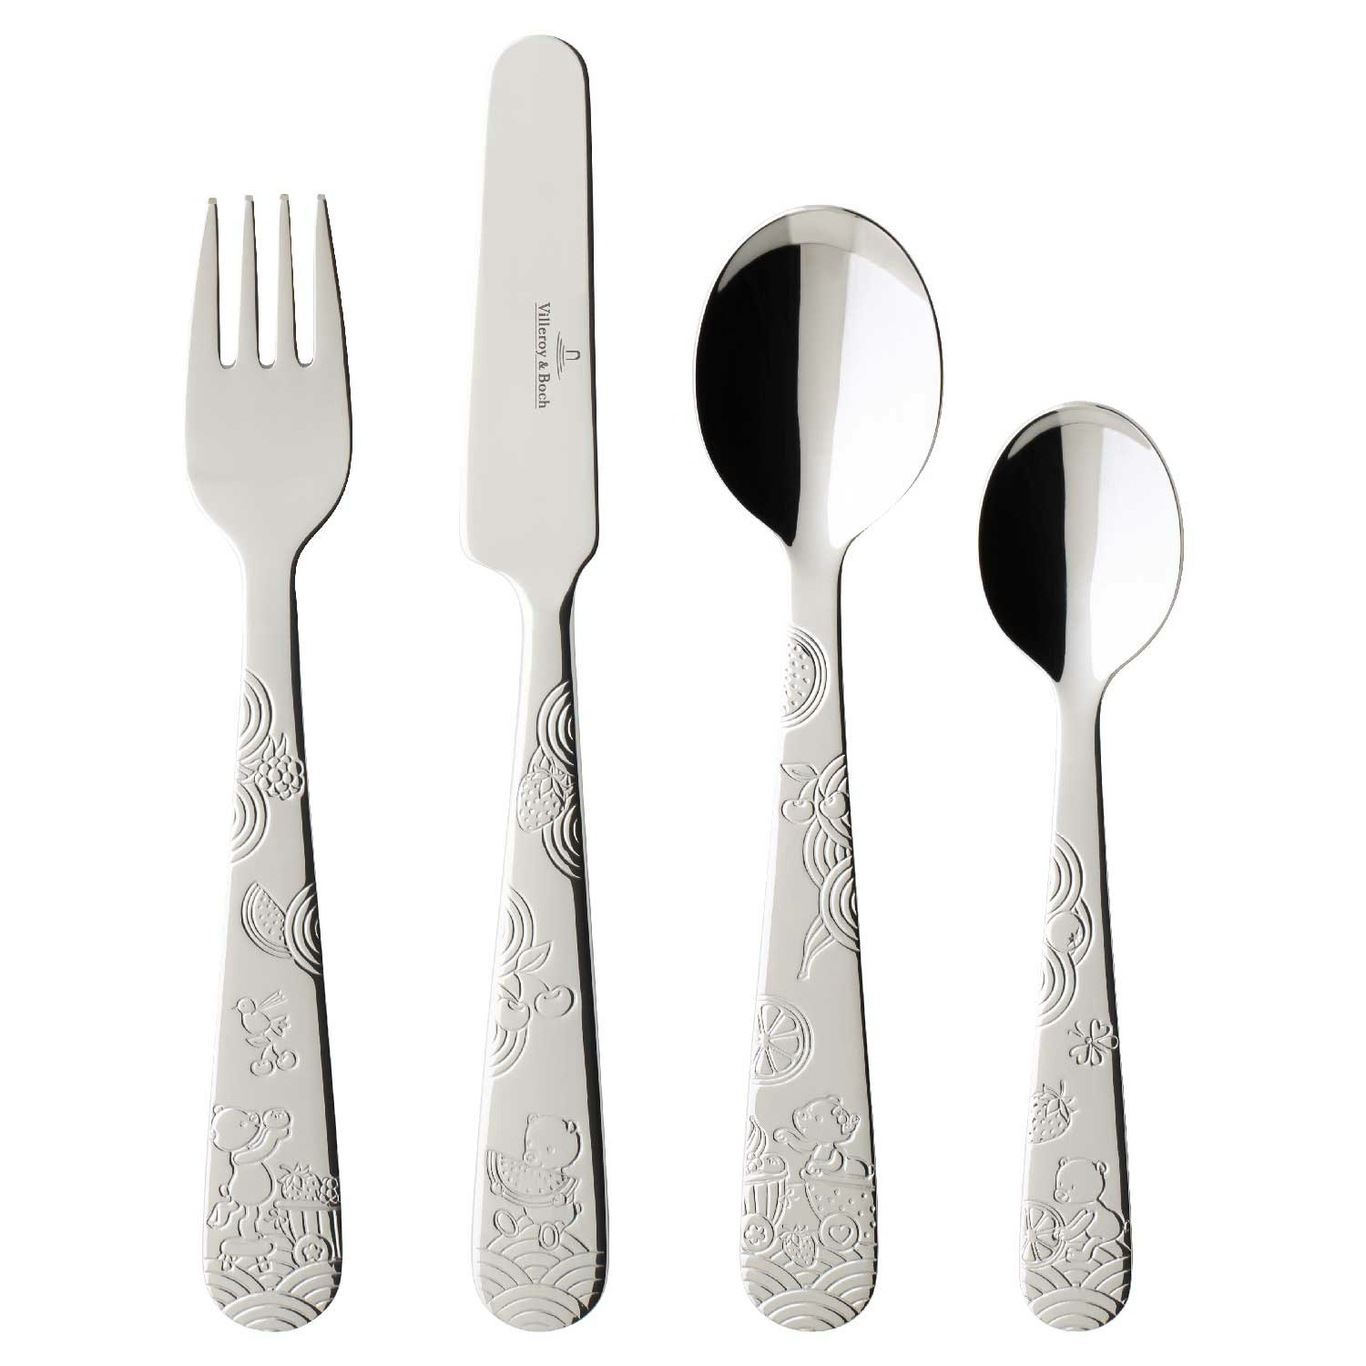 https://royaldesign.com/image/2/villeroy-boch-hungry-as-a-bear-childrens-cutlery-4-pcs-stainless-steel-0?w=800&quality=80